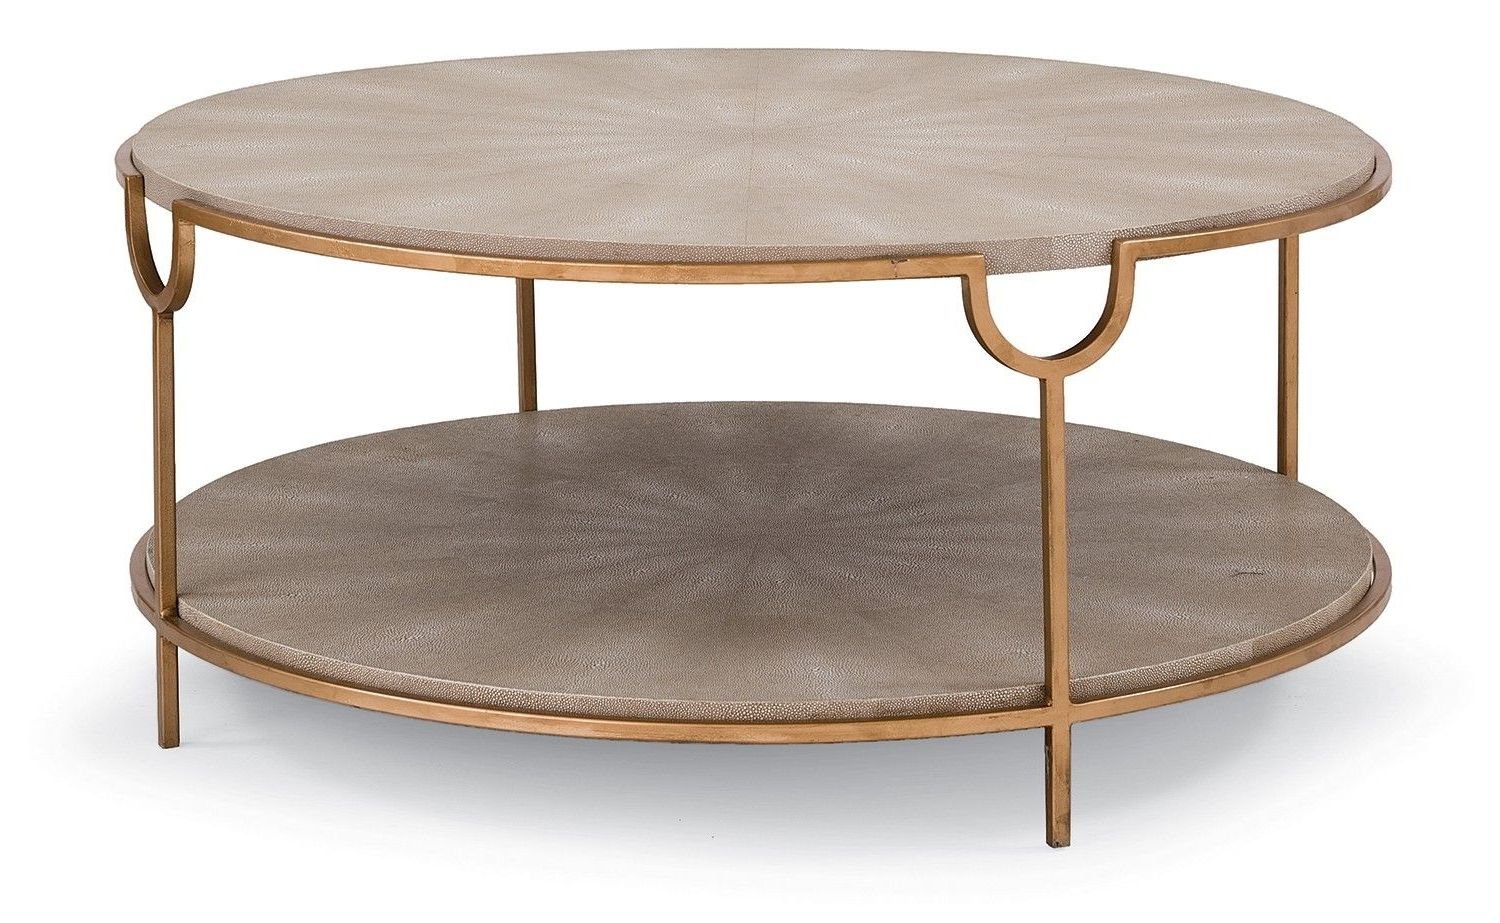 Faux Shagreen Texture Mixed With A Captivating Gold Base Inside Widely Used Faux Shagreen Coffee Tables (View 5 of 20)